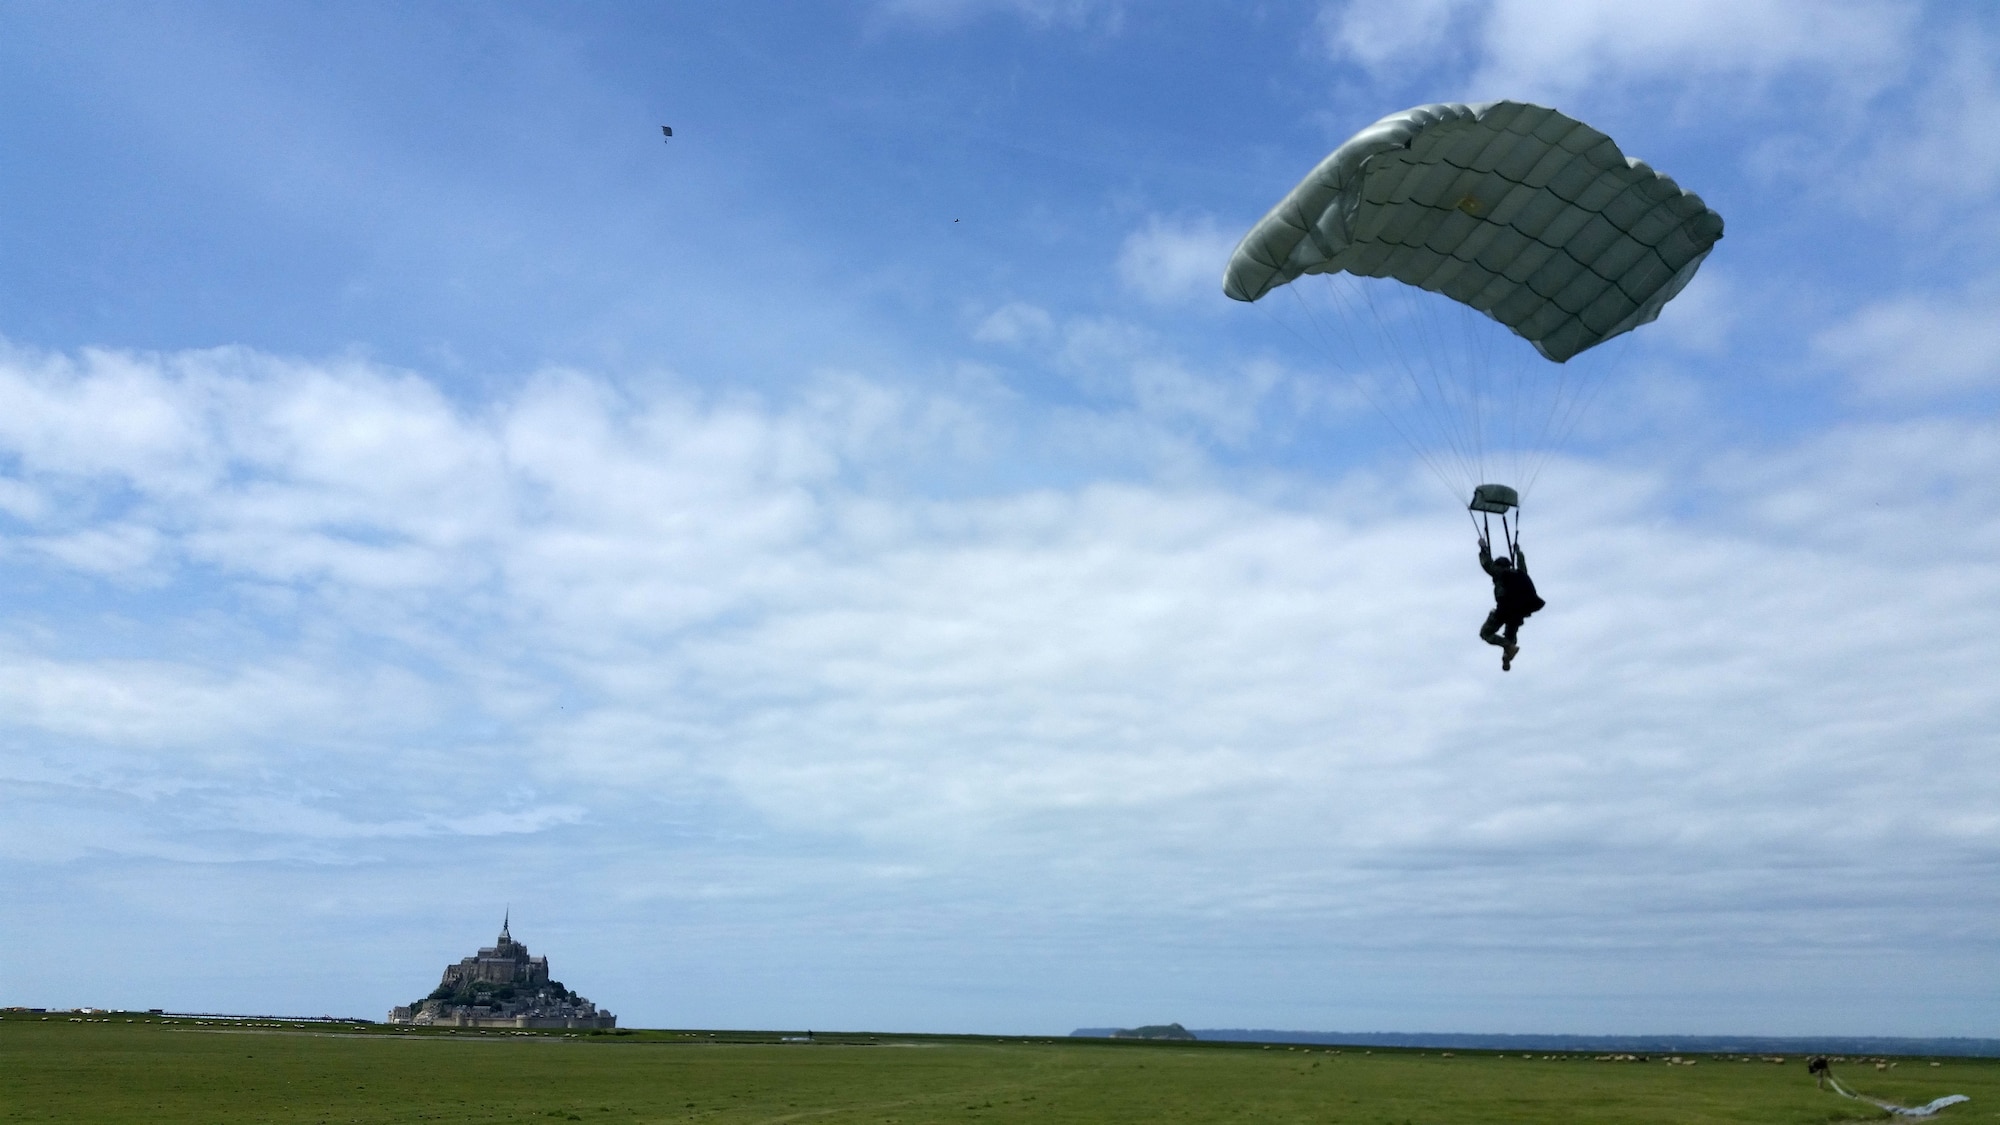 A U.S. Special Operations Command in Europe operator prepares to land just outside of the Mont Saint Michel Abbey in Normandy, France, on May 30, 2015, to commemorate the 71st anniversary of the liberation of France as well as those who served in World War II. Air Commandos assigned to the 321st Special Tactics Squadron, along with other operators within SOCEUR, perform military free fall jumps outside of the U.N. designated world heritage site. (U.S. Air Force photo by Maj. Christina Hoggatt)